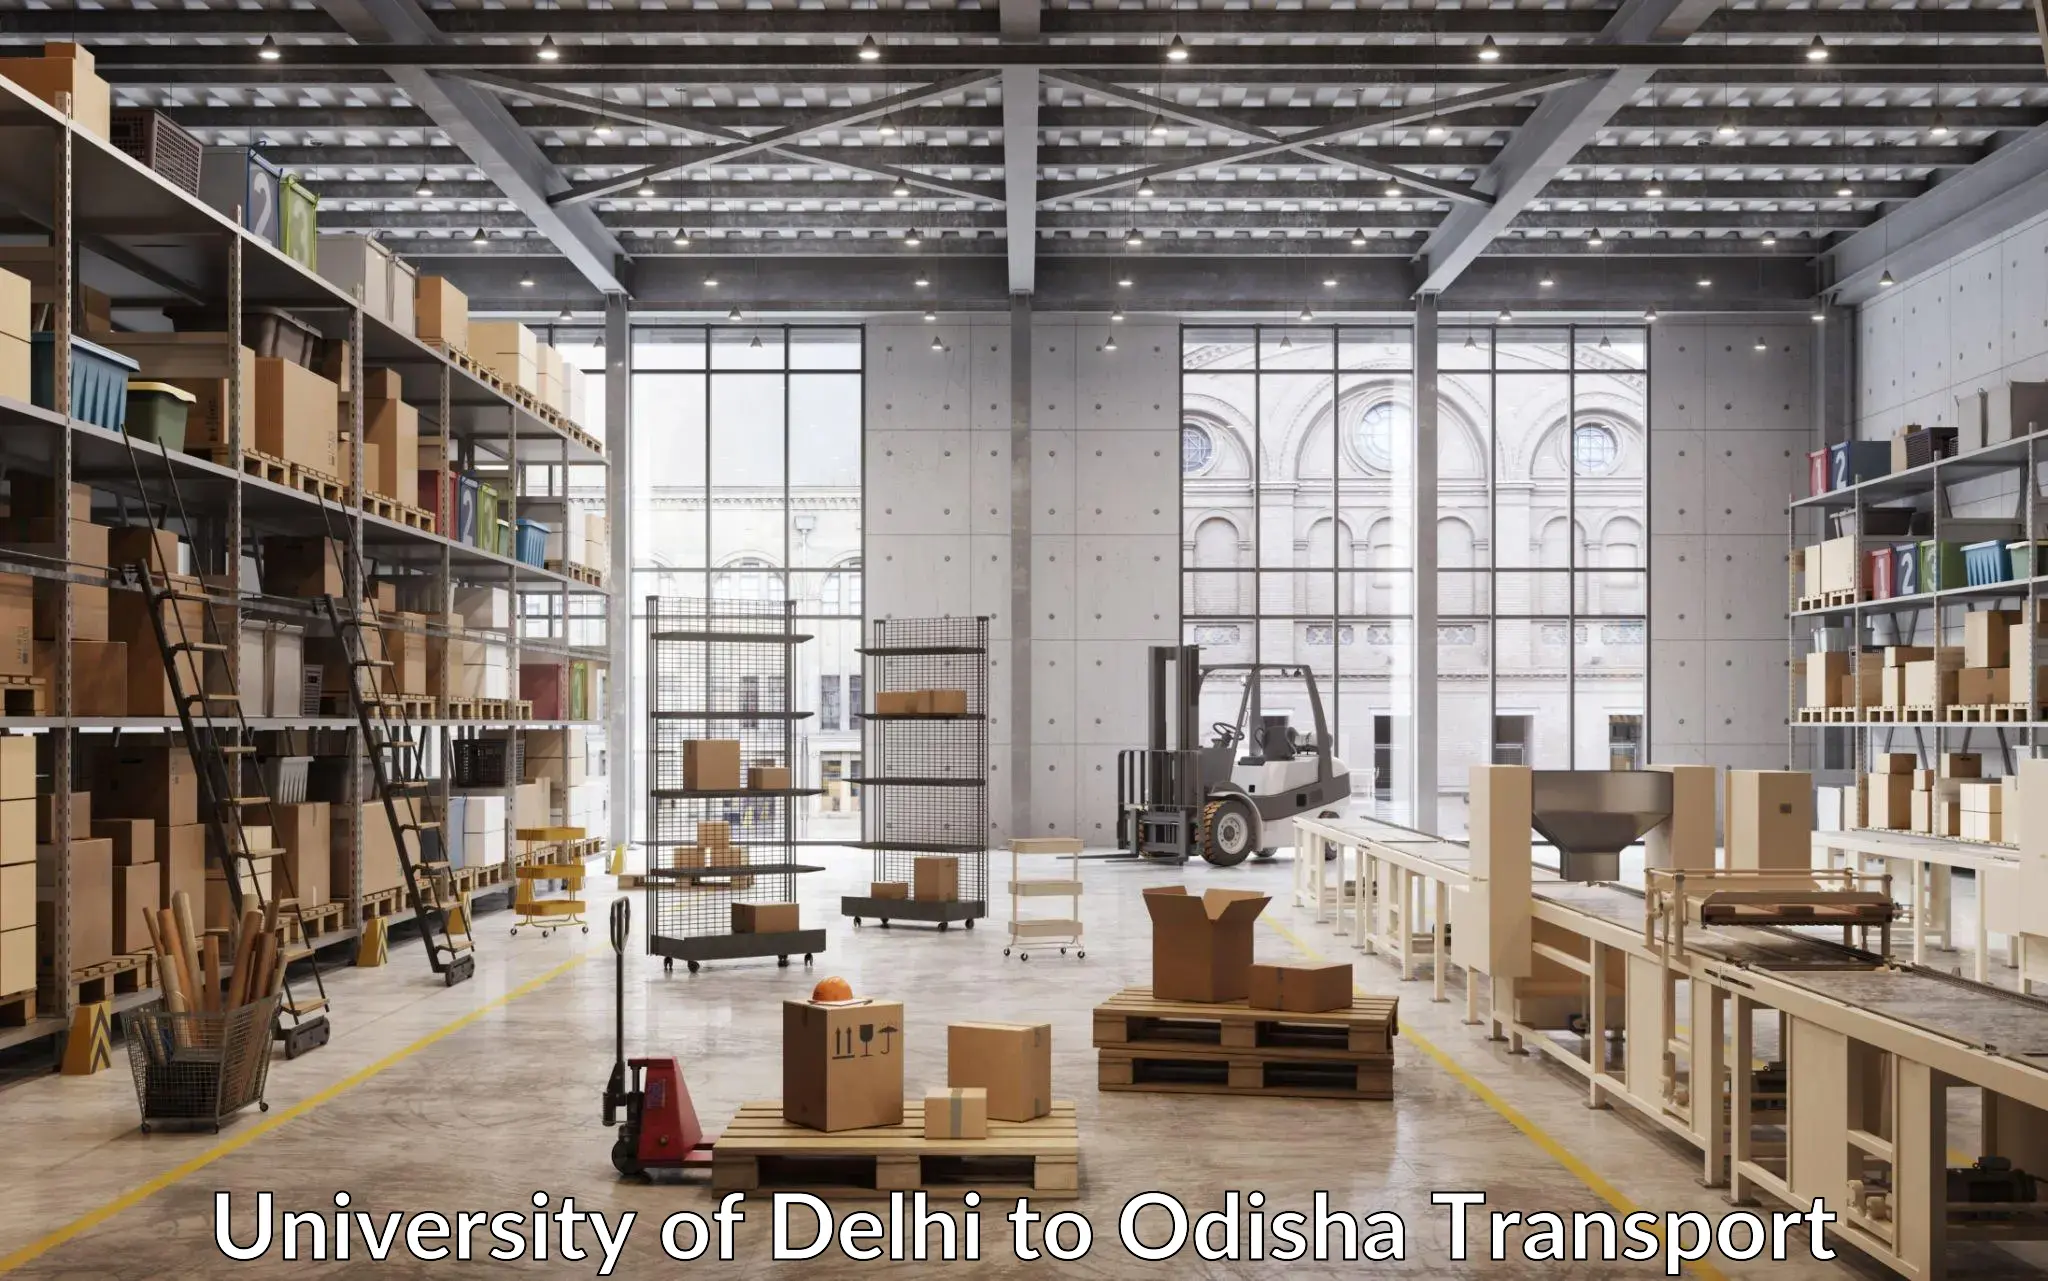 Transport bike from one state to another in University of Delhi to Odisha